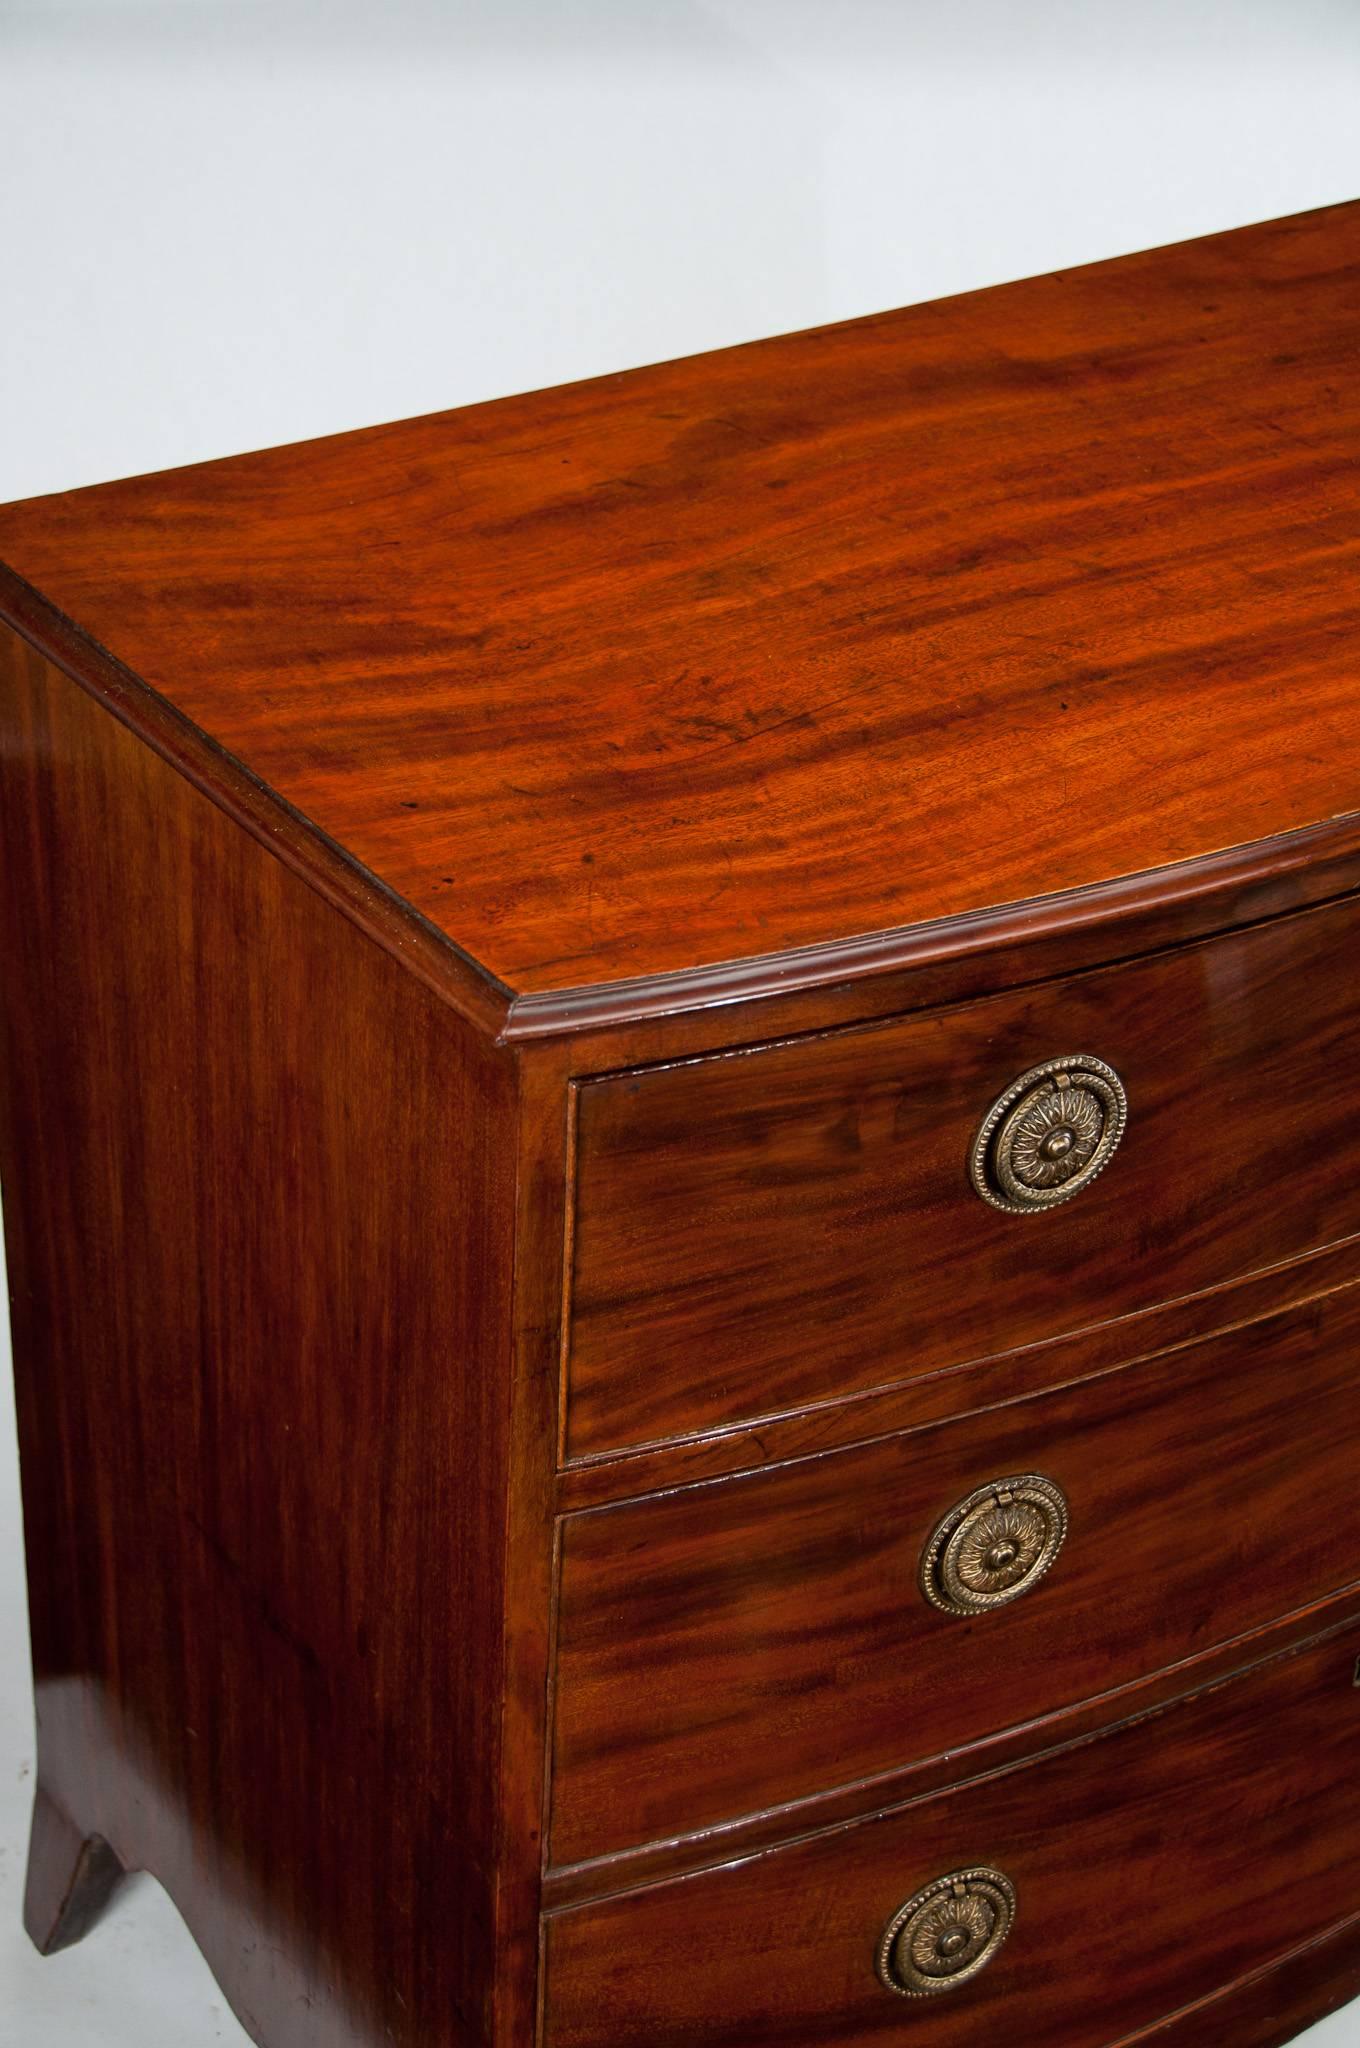 18th Century Antique Georgian Bow Front Chest Having an Unusual Drawer Formation